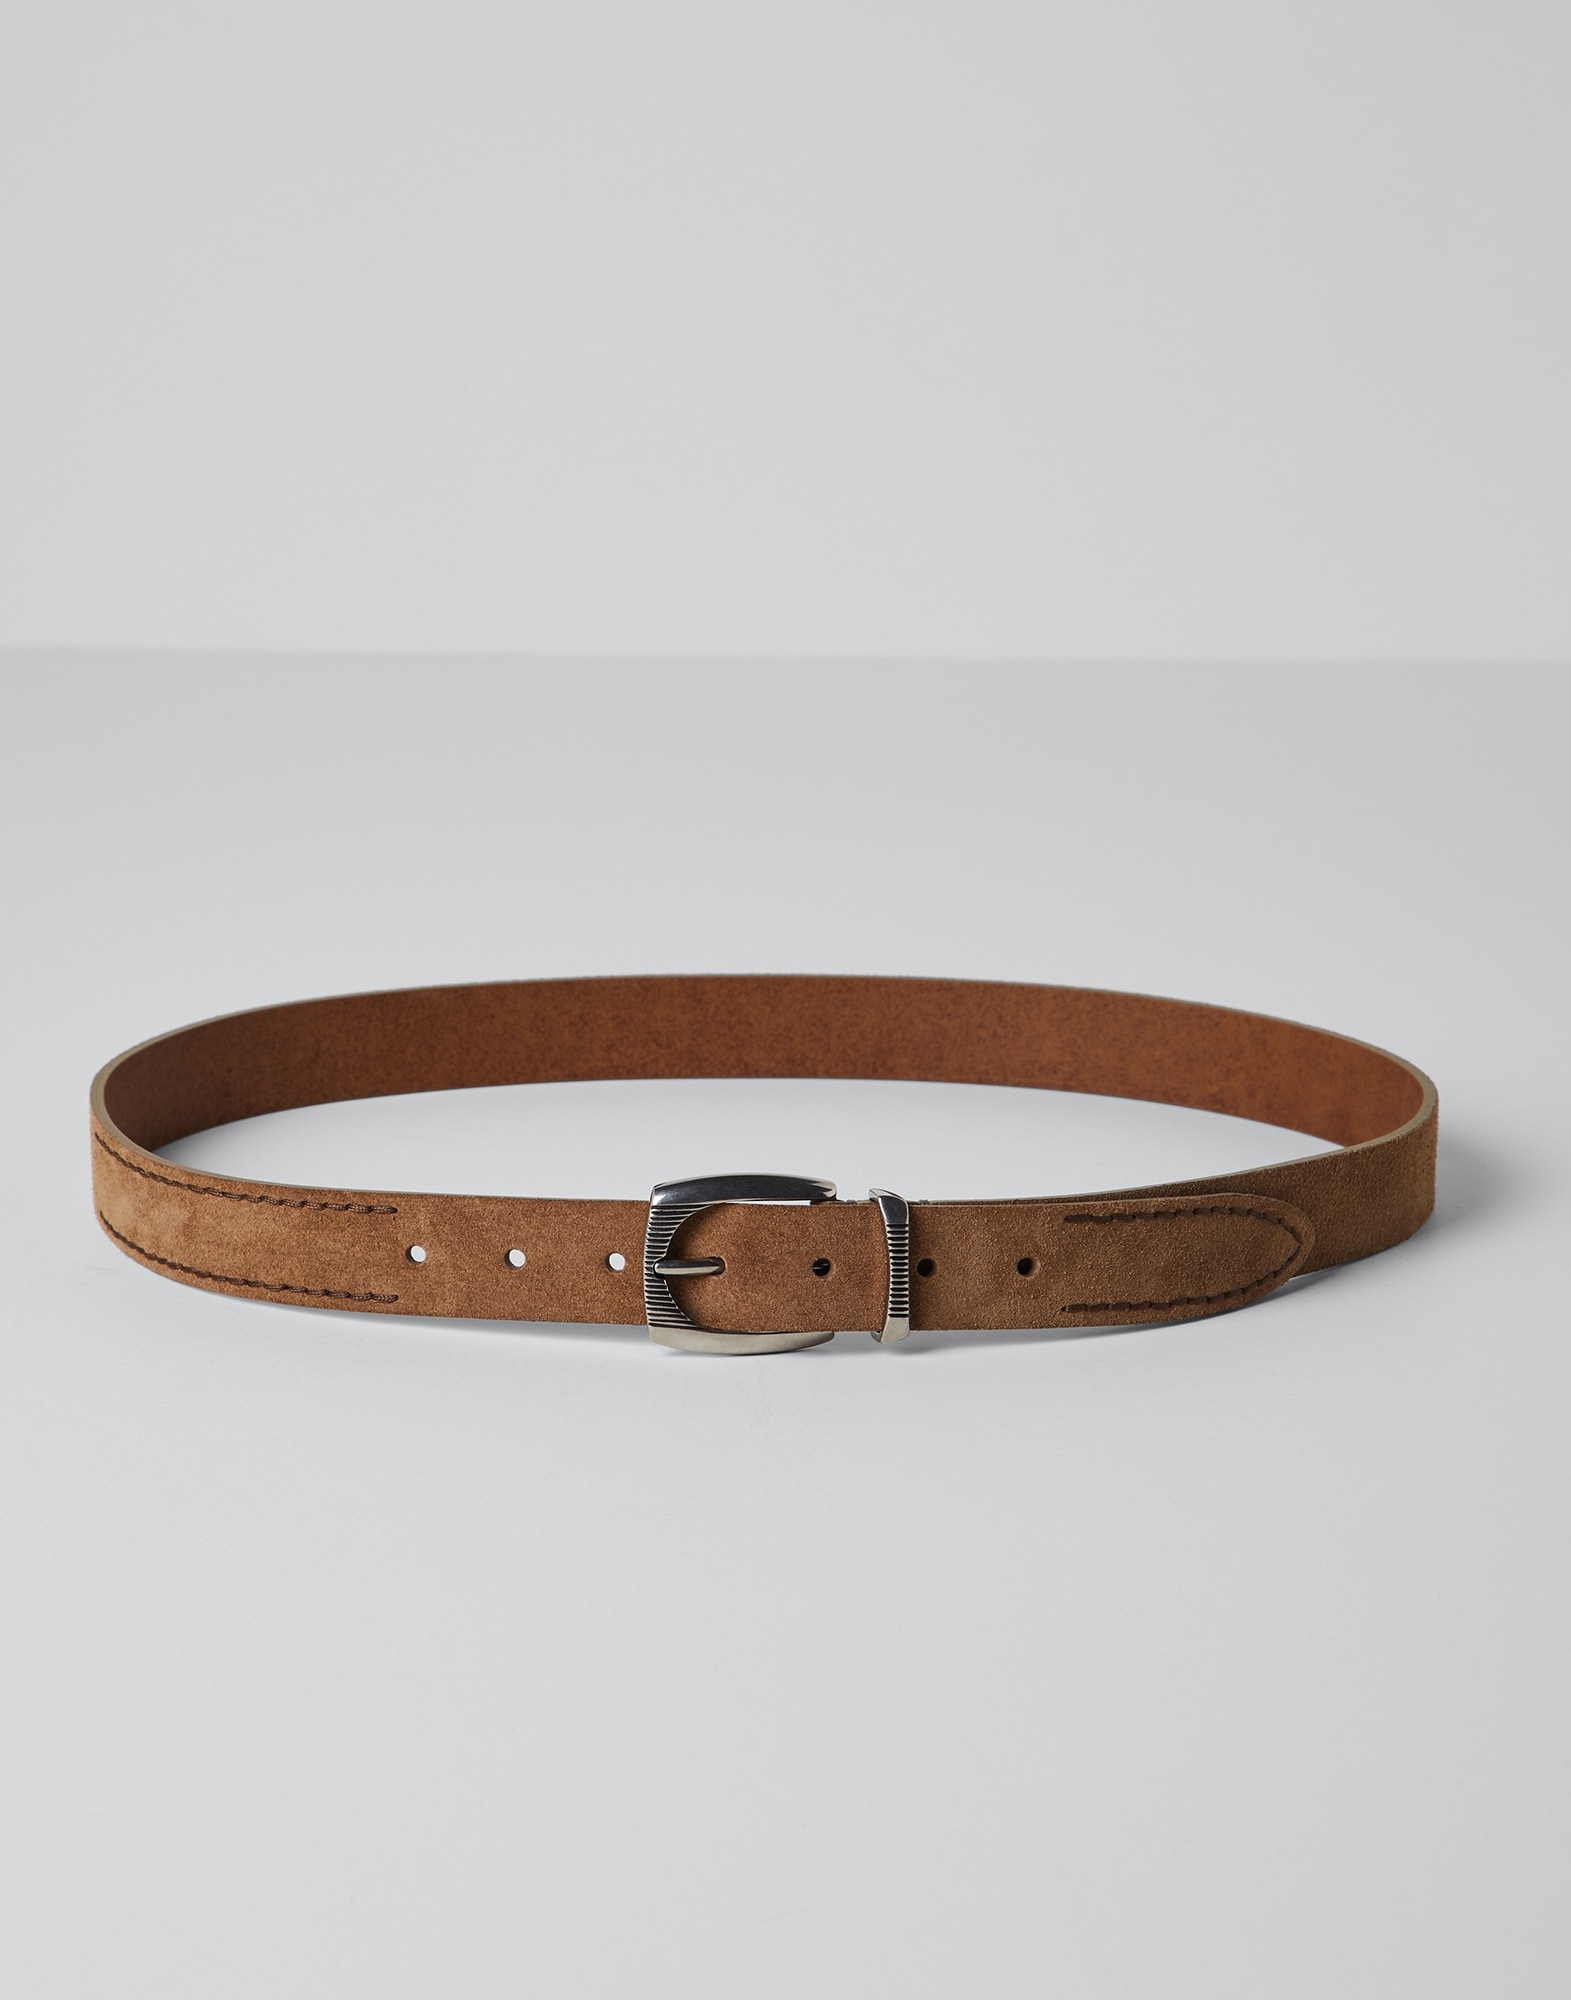 Reversed leather belt with stitching and detailed buckle - 1